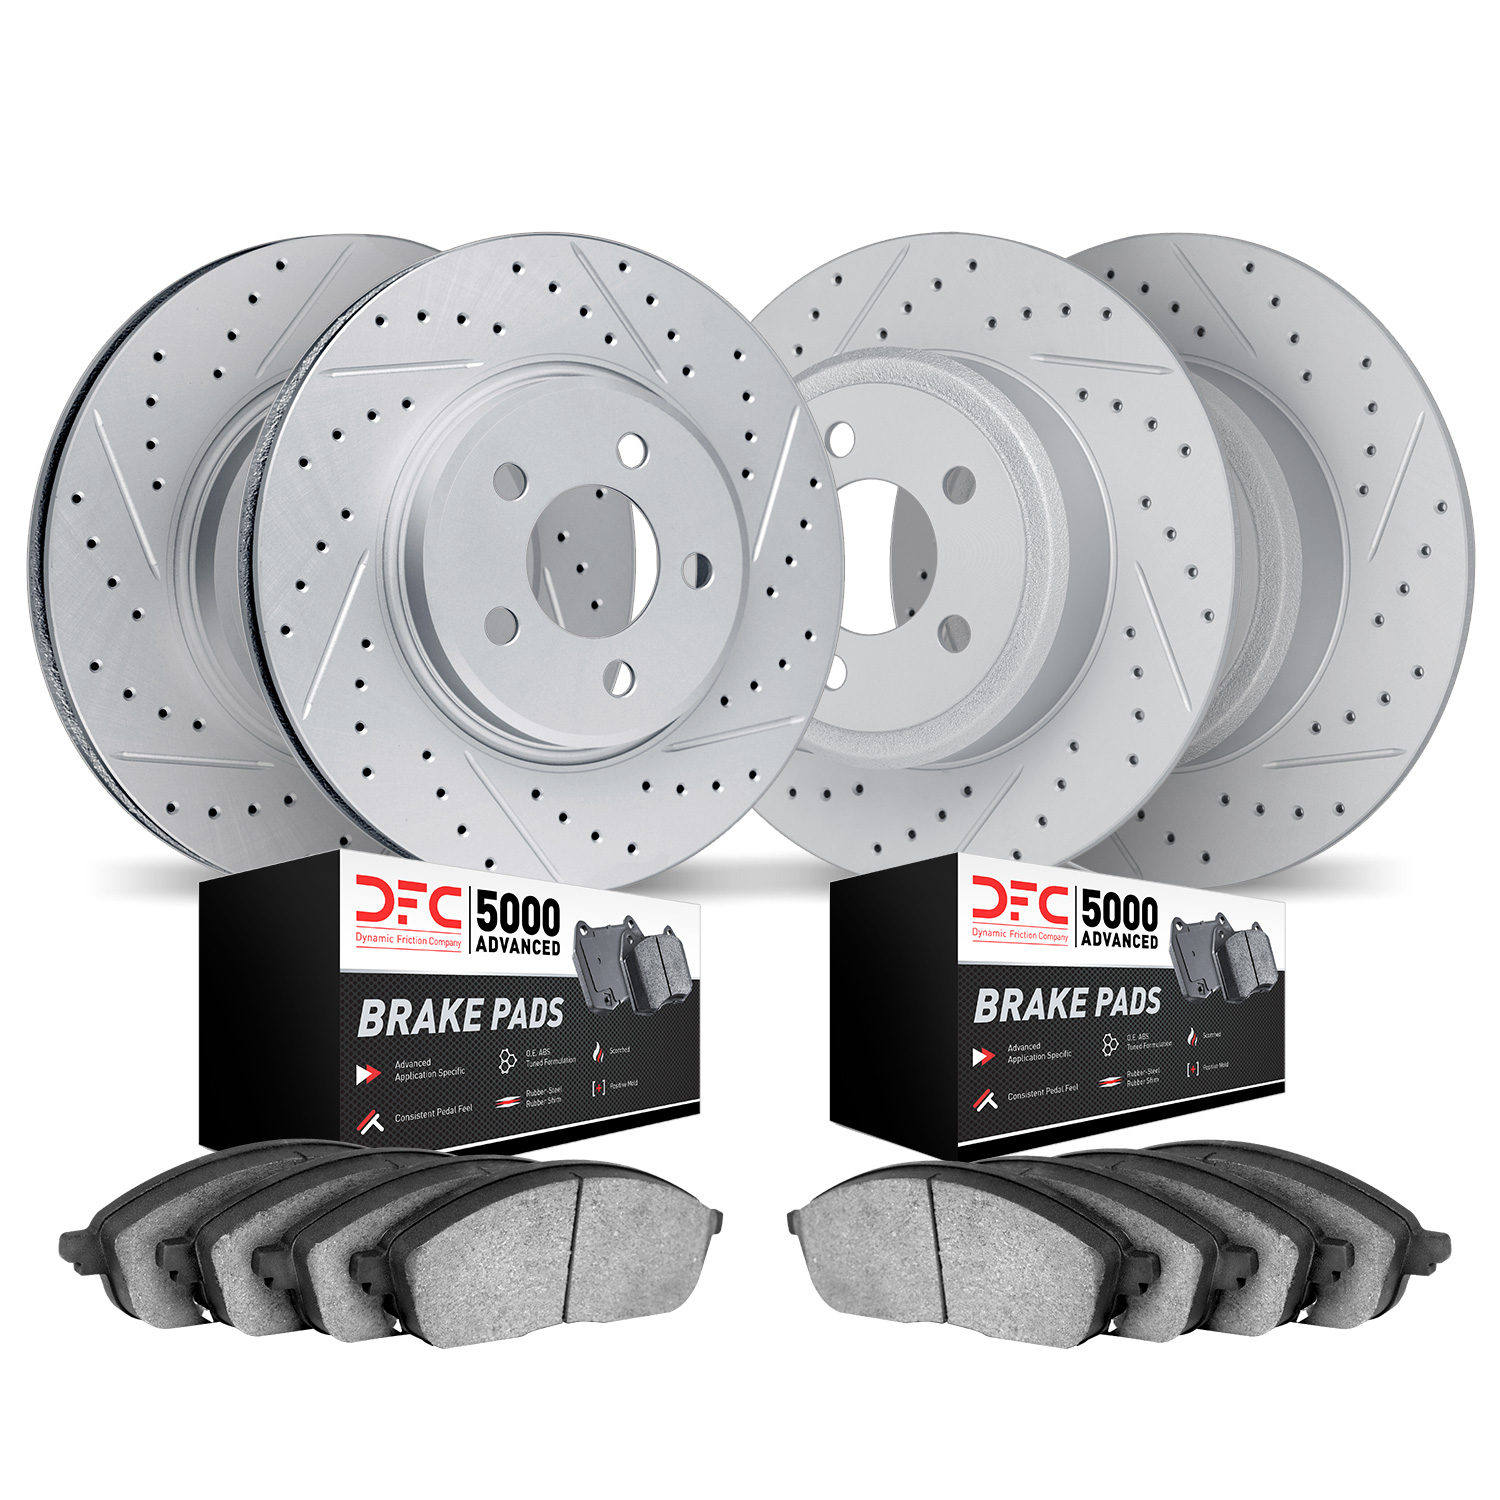 2504-59042 Geoperformance Drilled/Slotted Rotors w/5000 Advanced Brake Pads Kit, 2011-2014 Acura/Honda, Position: Front and Rear